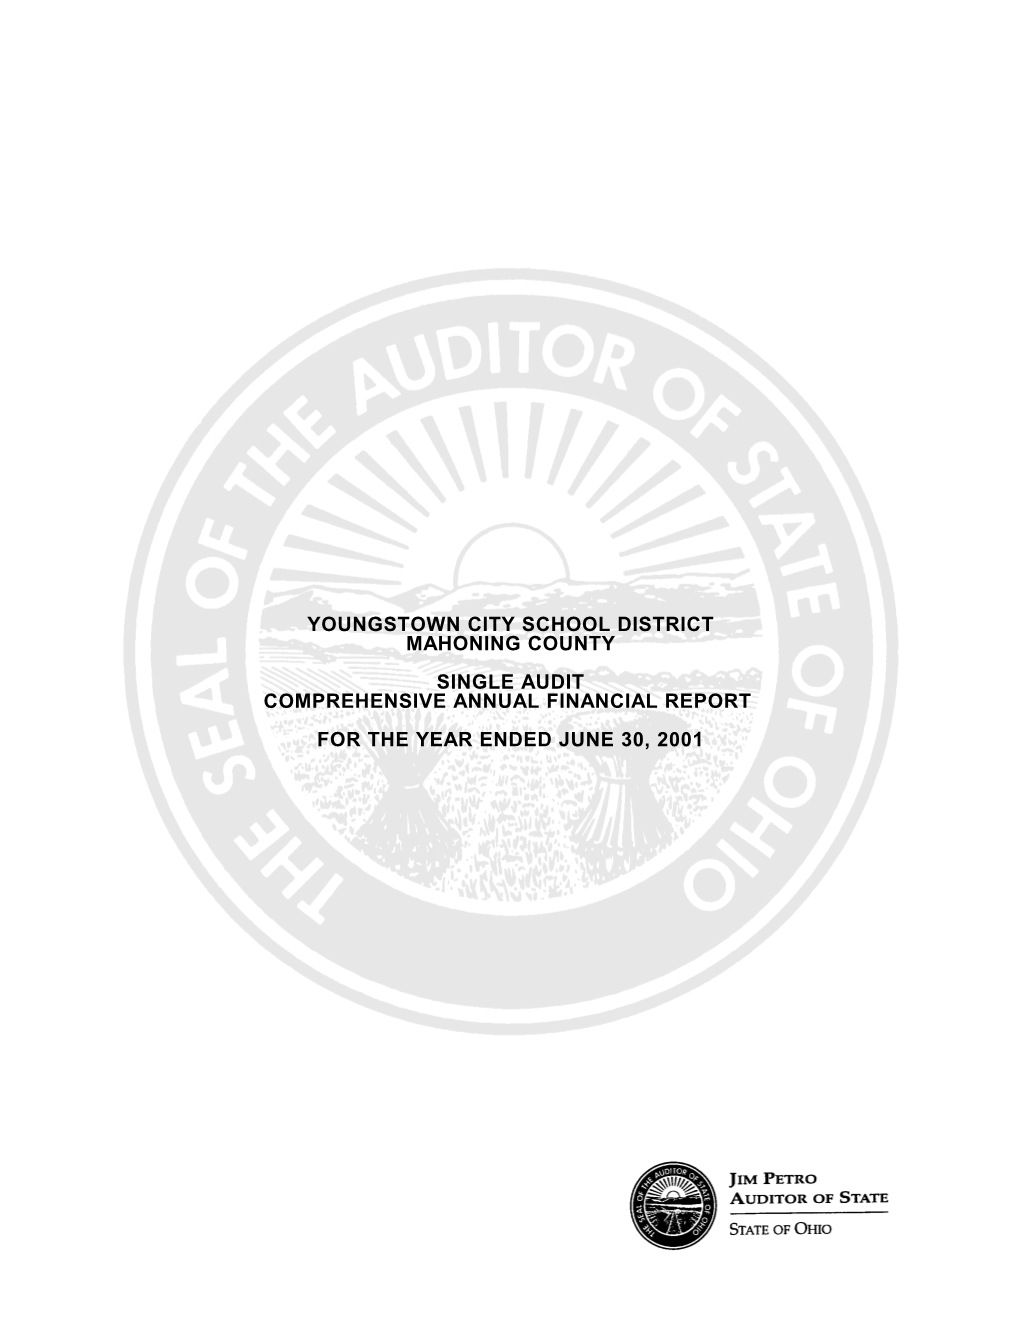 Youngstown City School District Mahoning County Single Audit Comprehensive Annual Financial Report for the Year Ended June 30, 2001